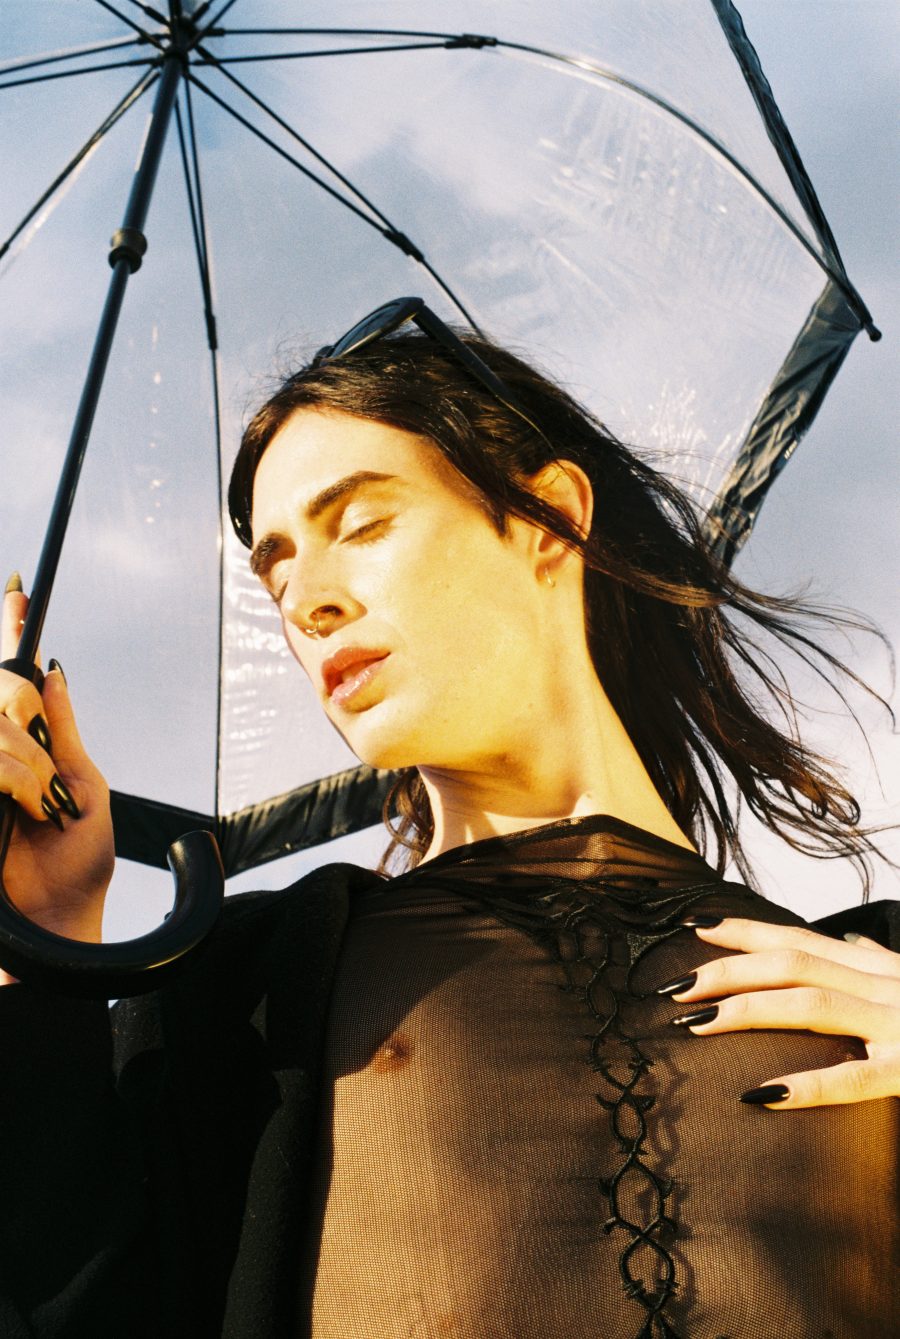 A person with closed eyes, holding an umbrella as their hair blows in the wind.